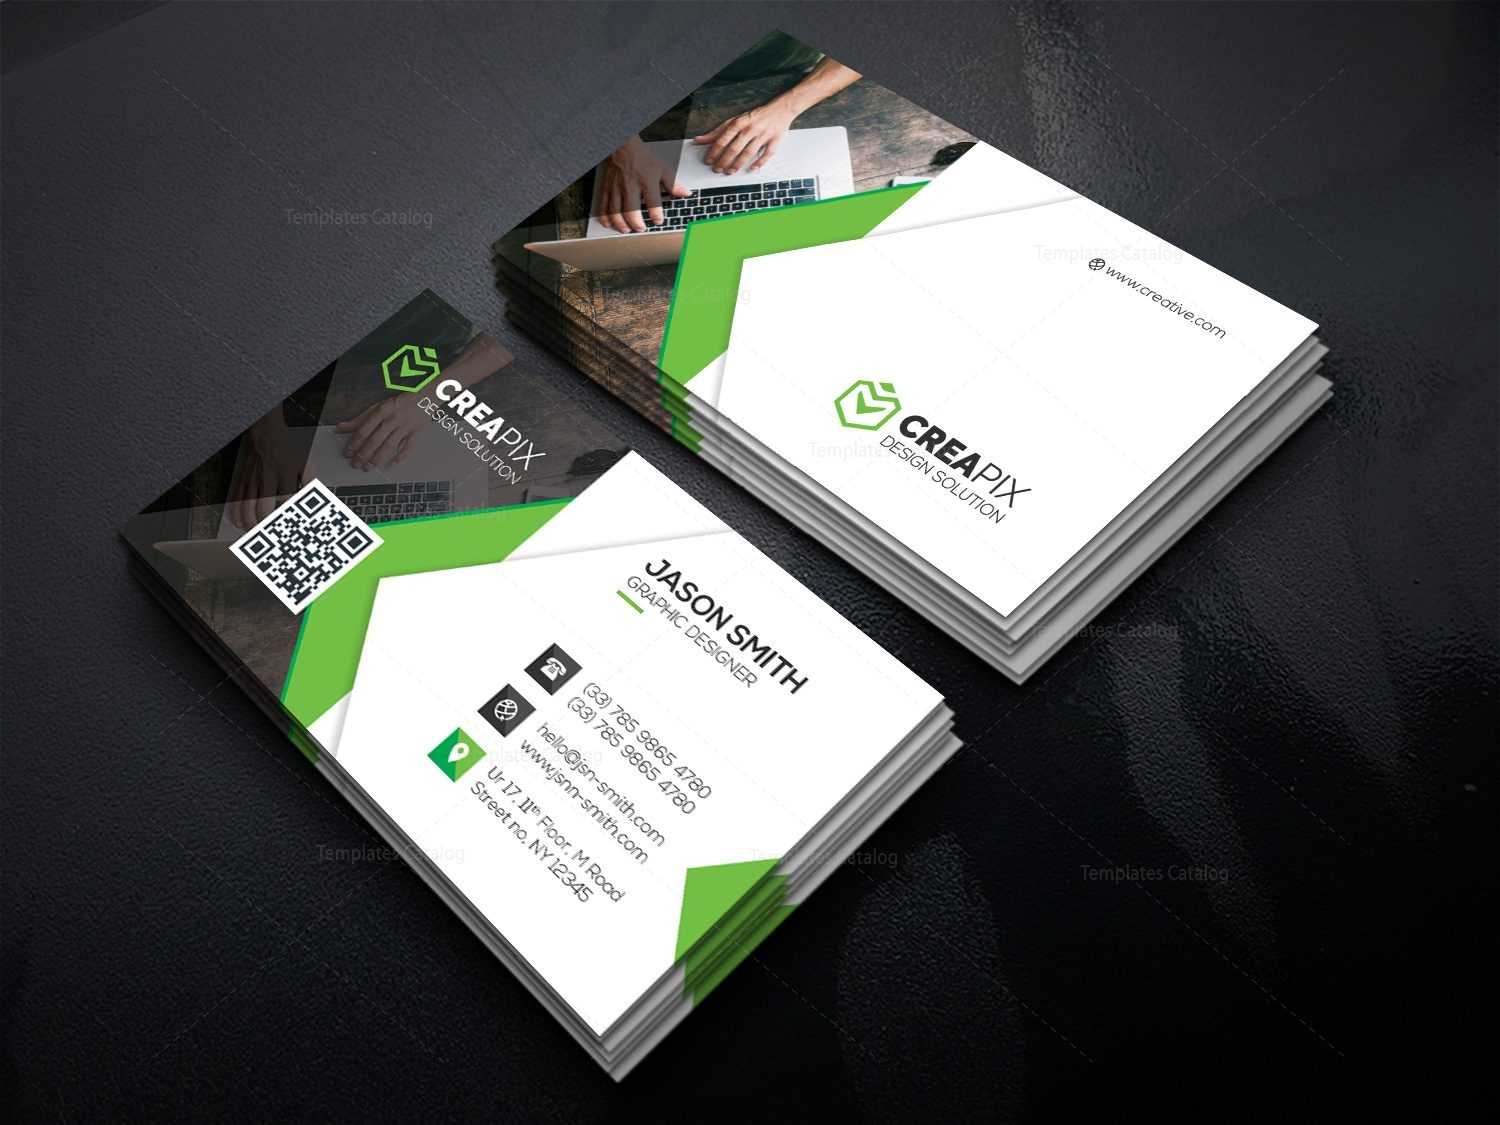 001 Personal Business Card Template 5Fit15002C1125Ssl1 Ideas Within Free Personal Business Card Templates